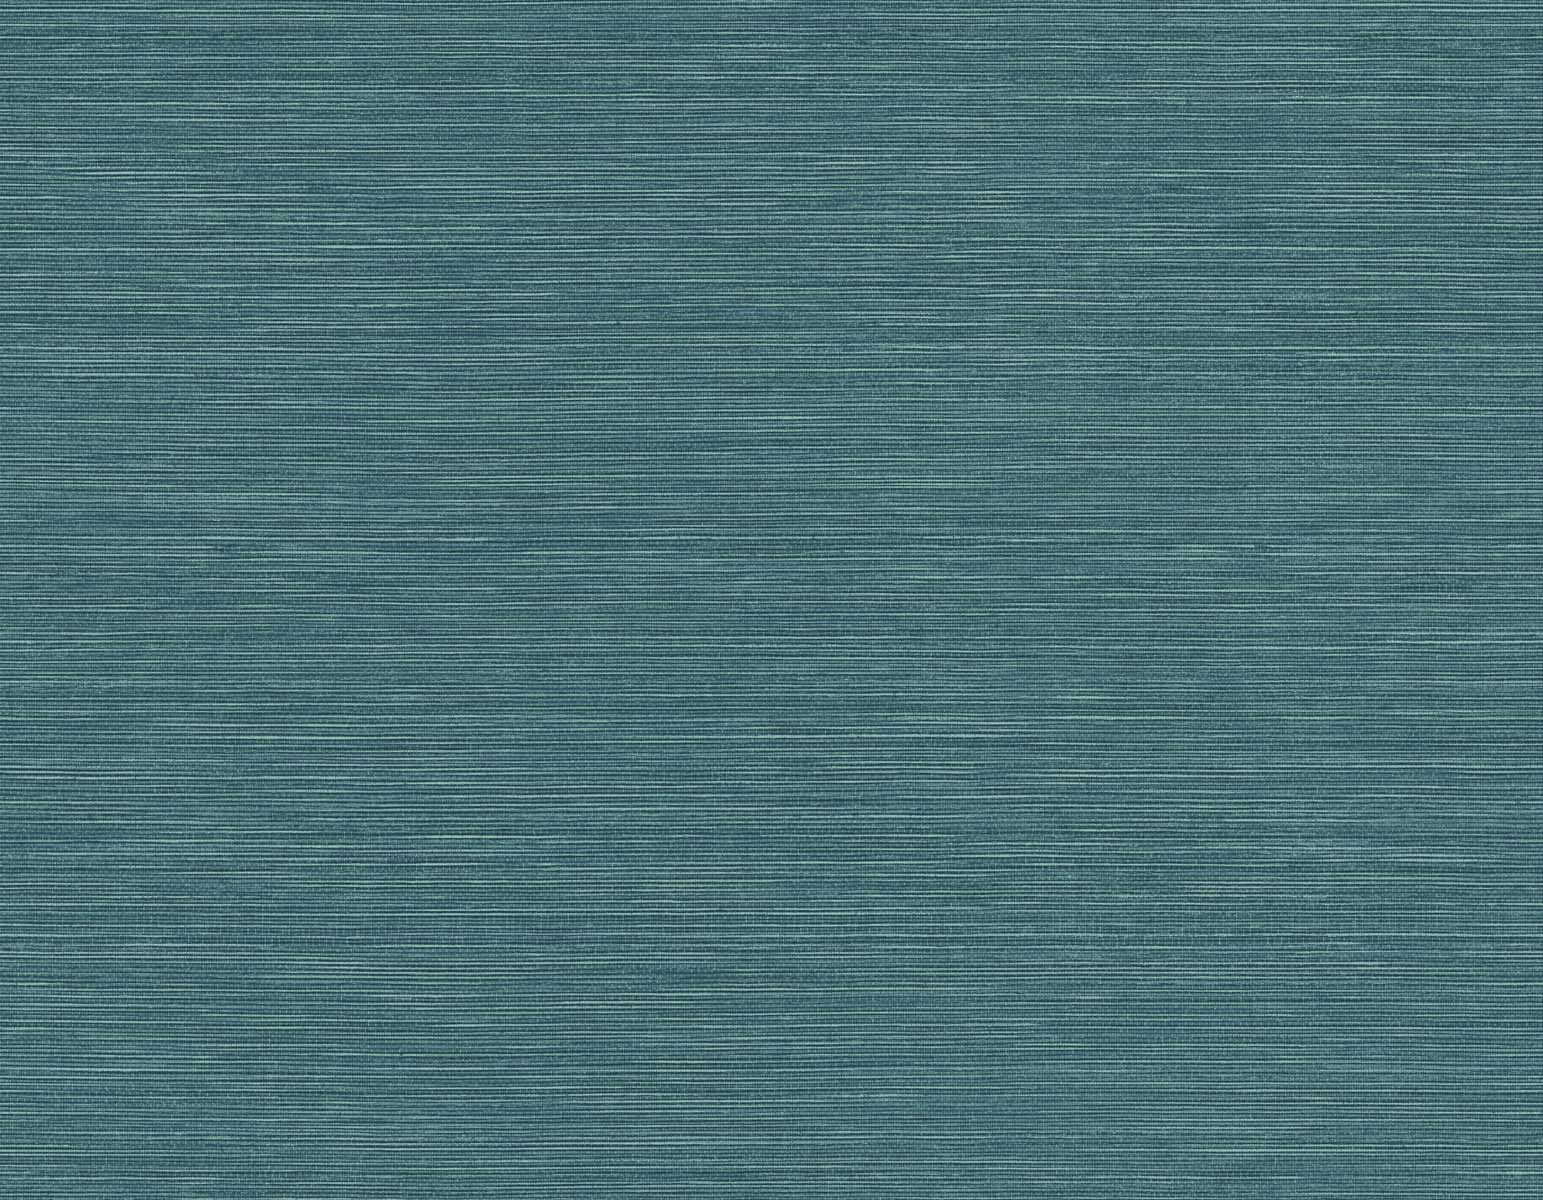 Buy Teal Woven Sisal Grasscloth Wallpaperteal Grasscloth Online in India   Etsy